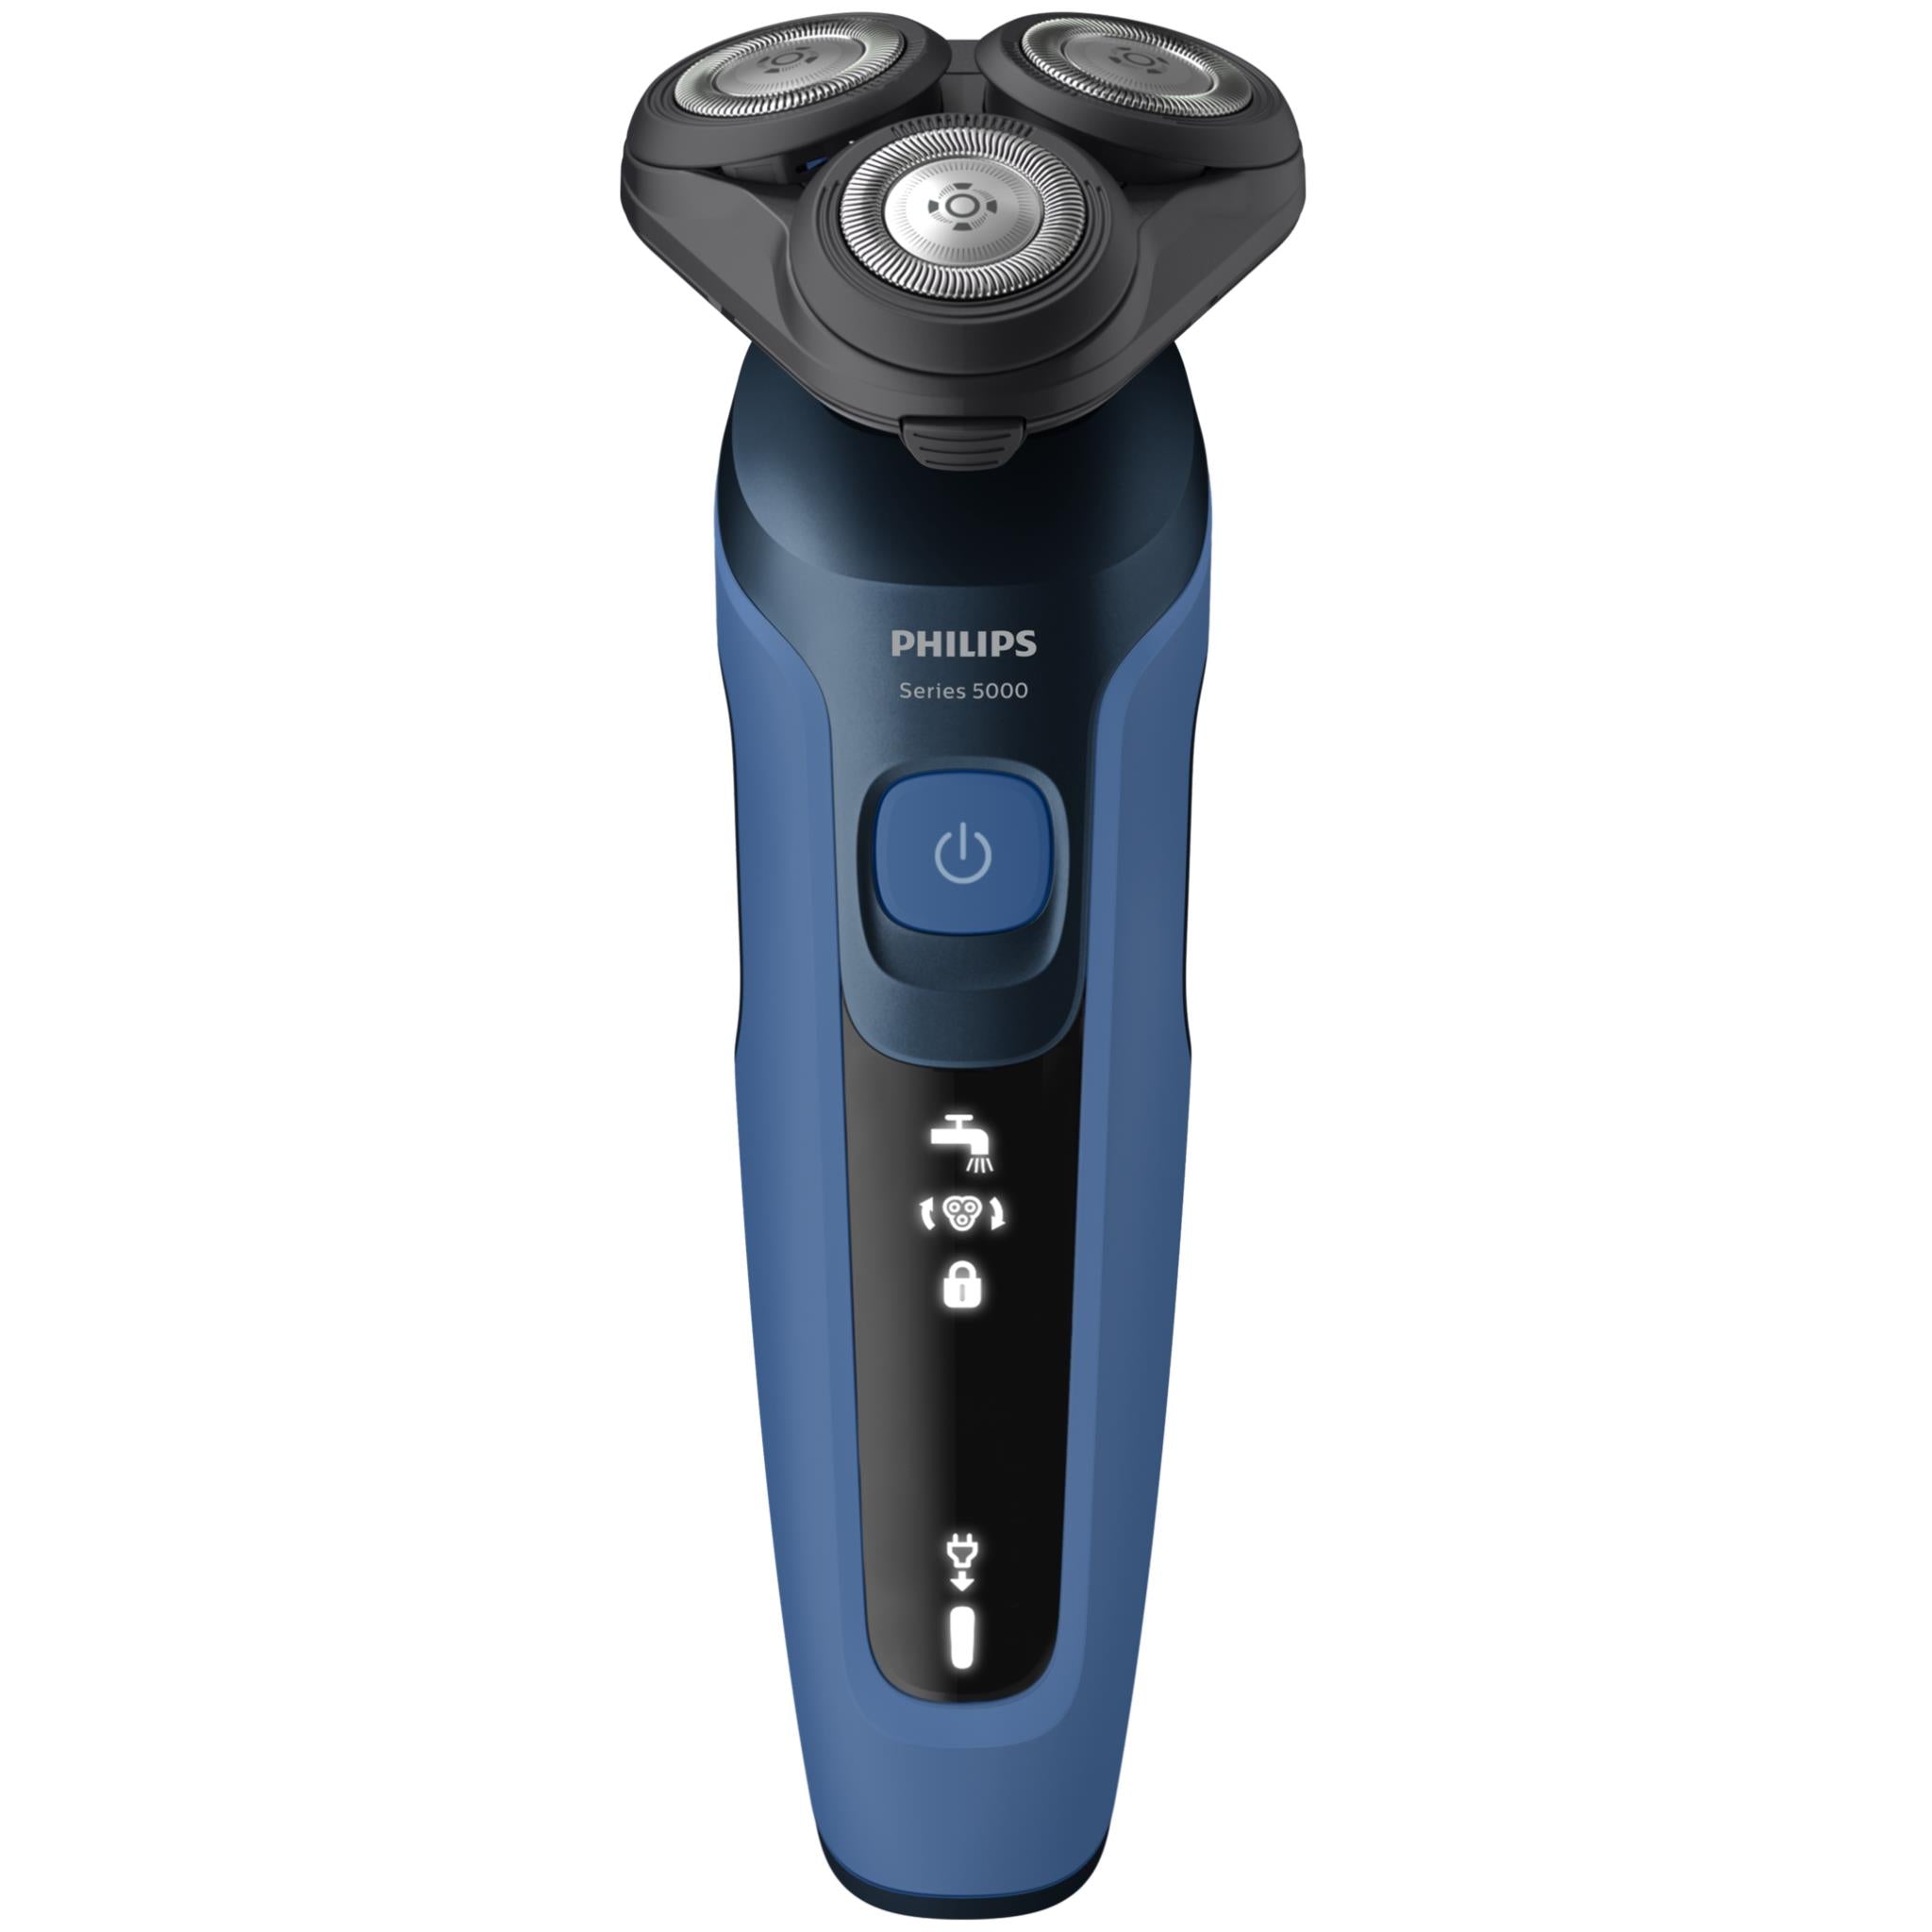 philips shaver series 5000 with precision trimmer attachment